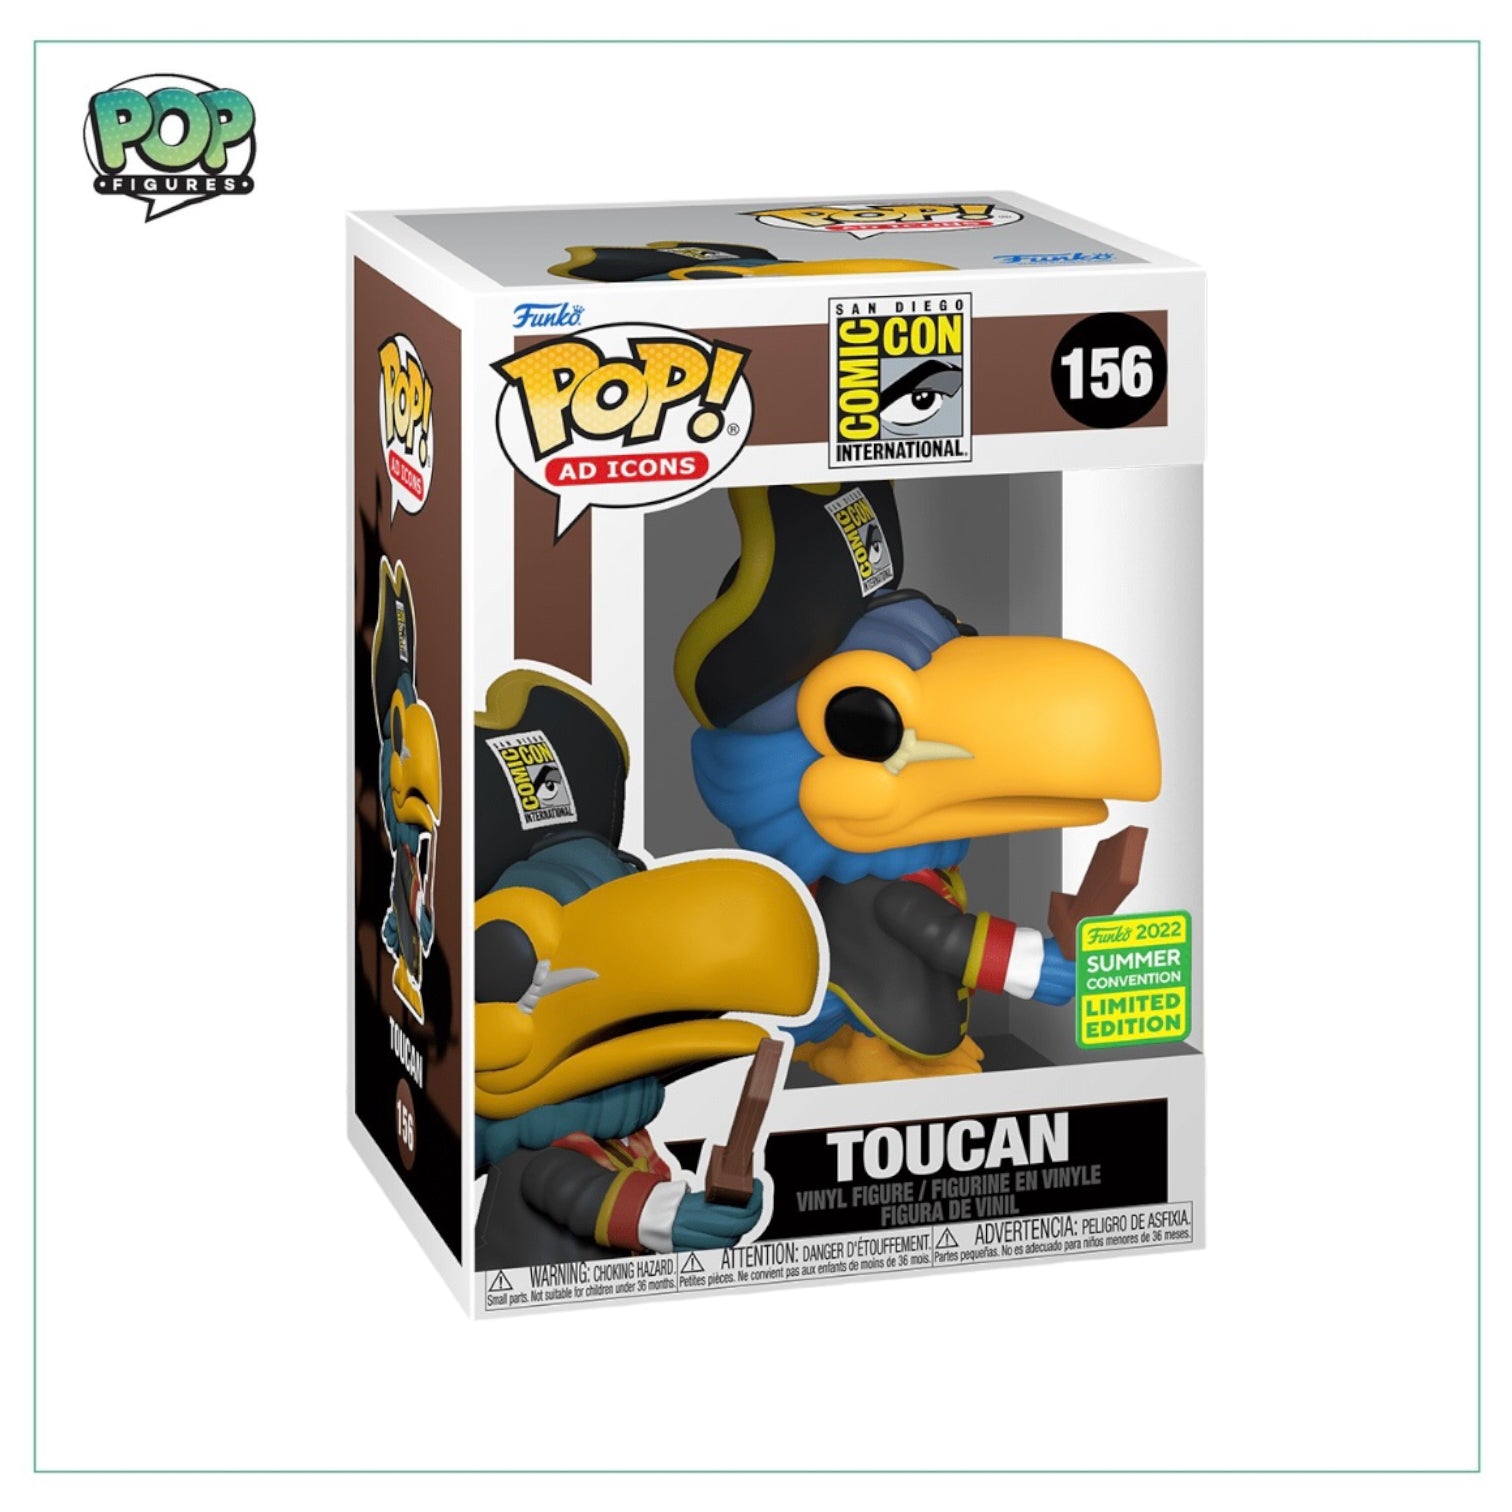 Toucan #156 Funko Pop! -  Ad Icons - 2022 SDCC Shared Exclusive